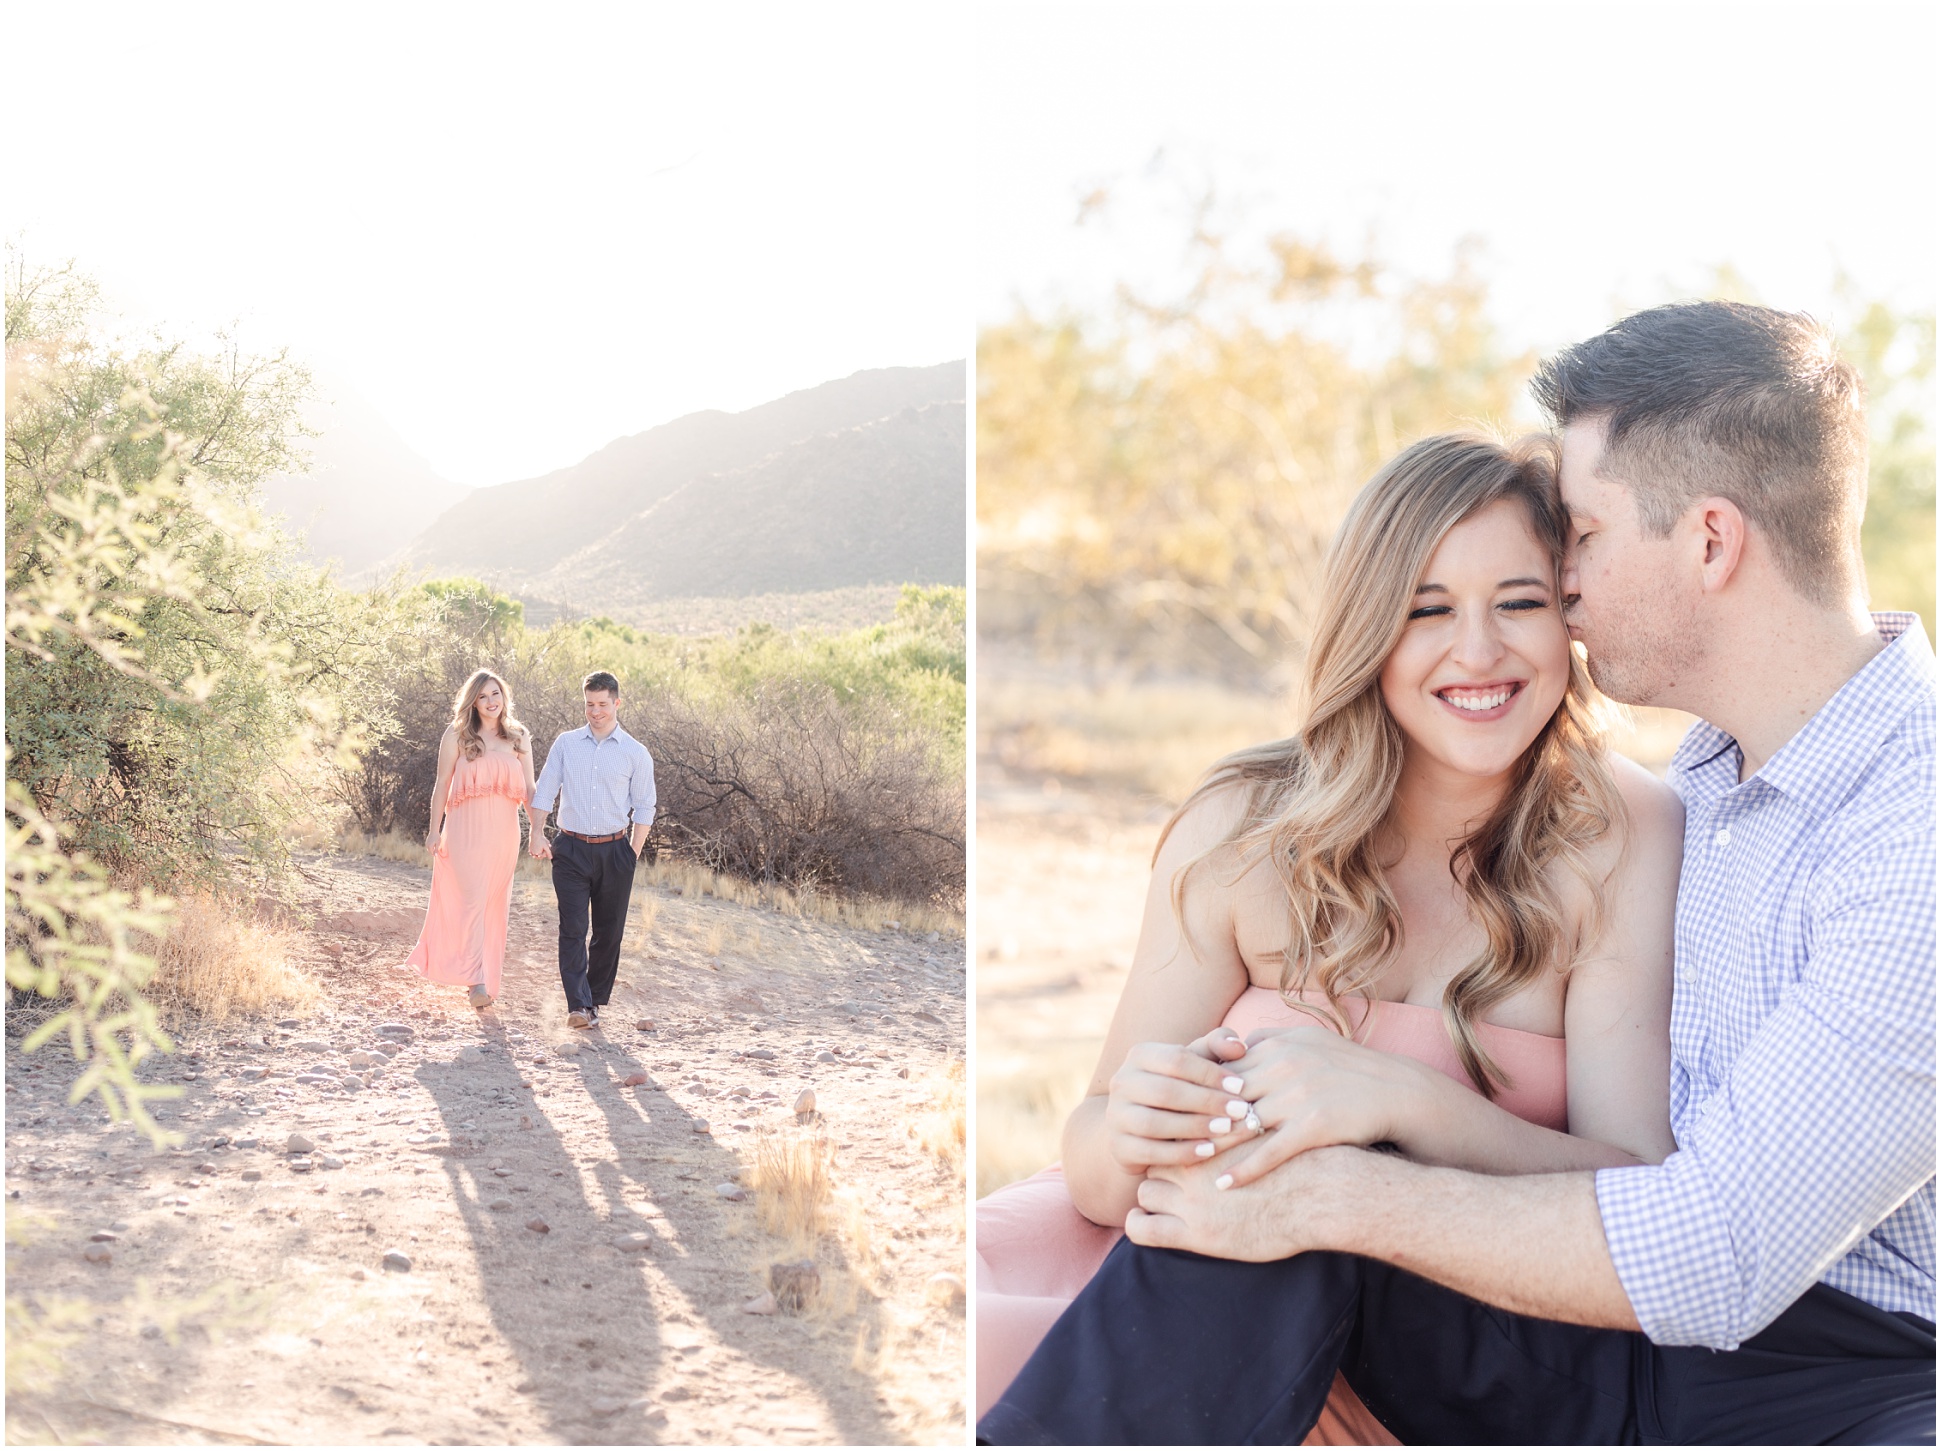 Two Images from a Salt River Engagement Session with Taylor and Matt